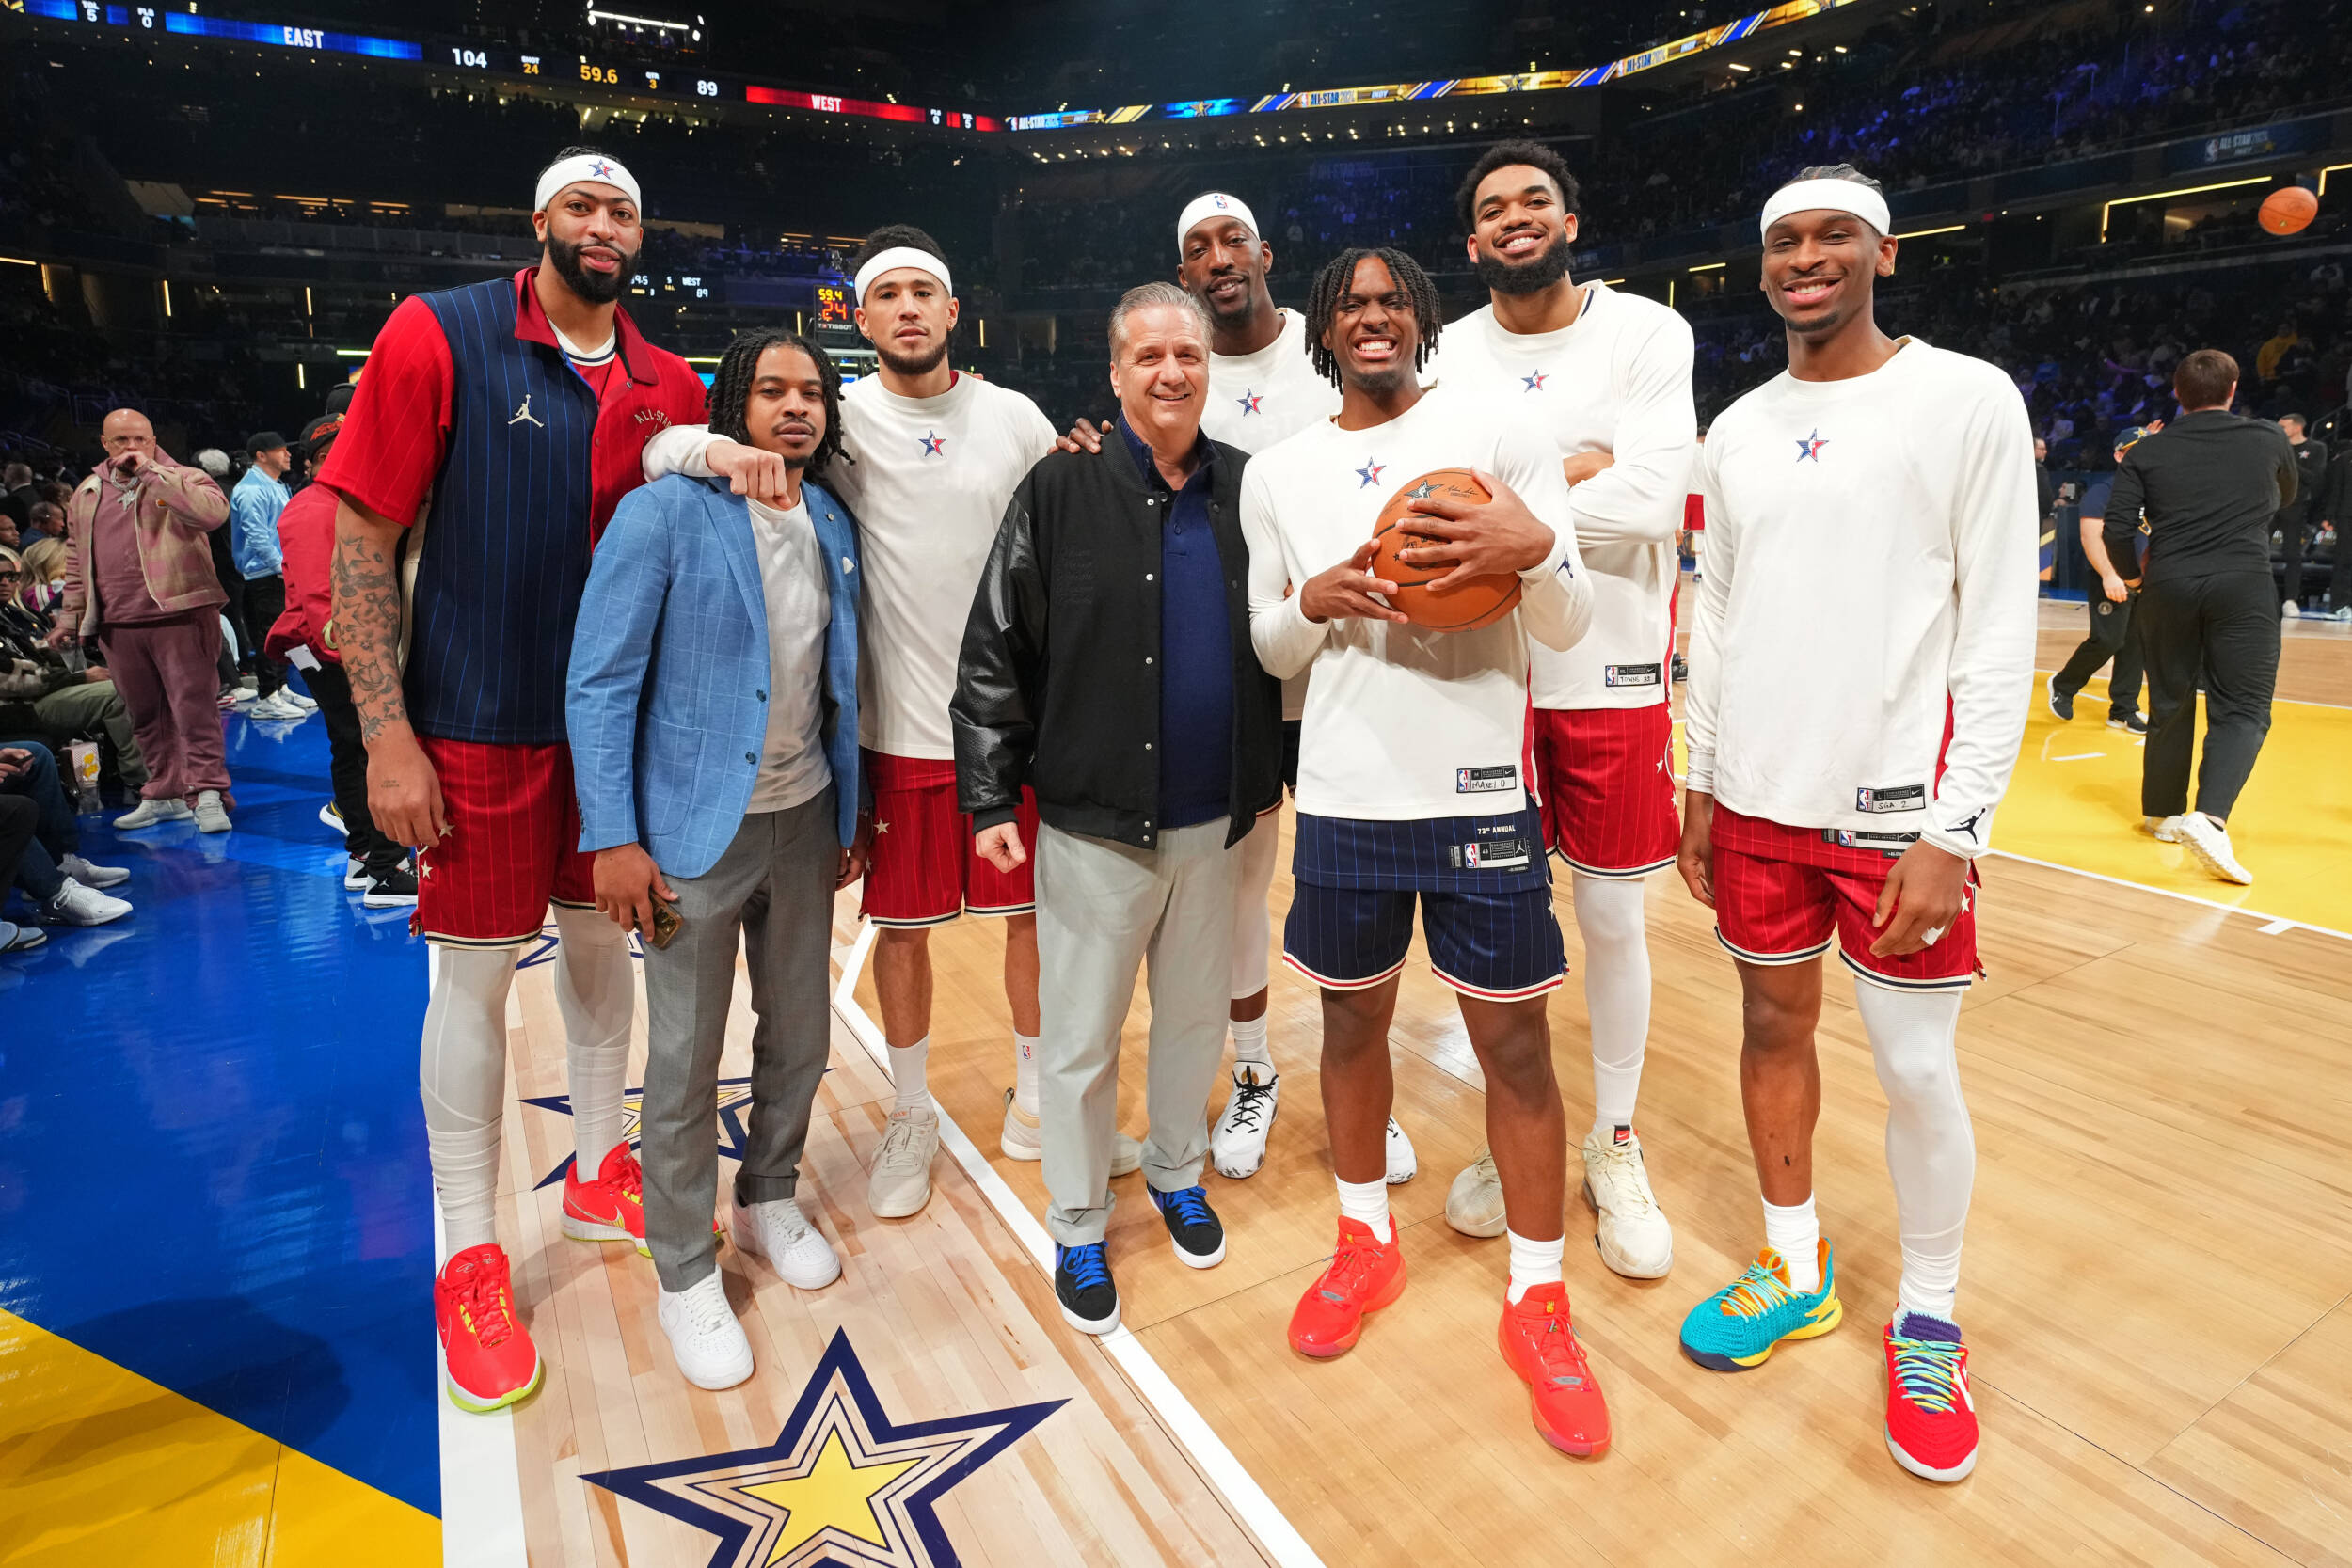 La Familia: Record Number of Wildcats Shine at NBA All-Star Weekend